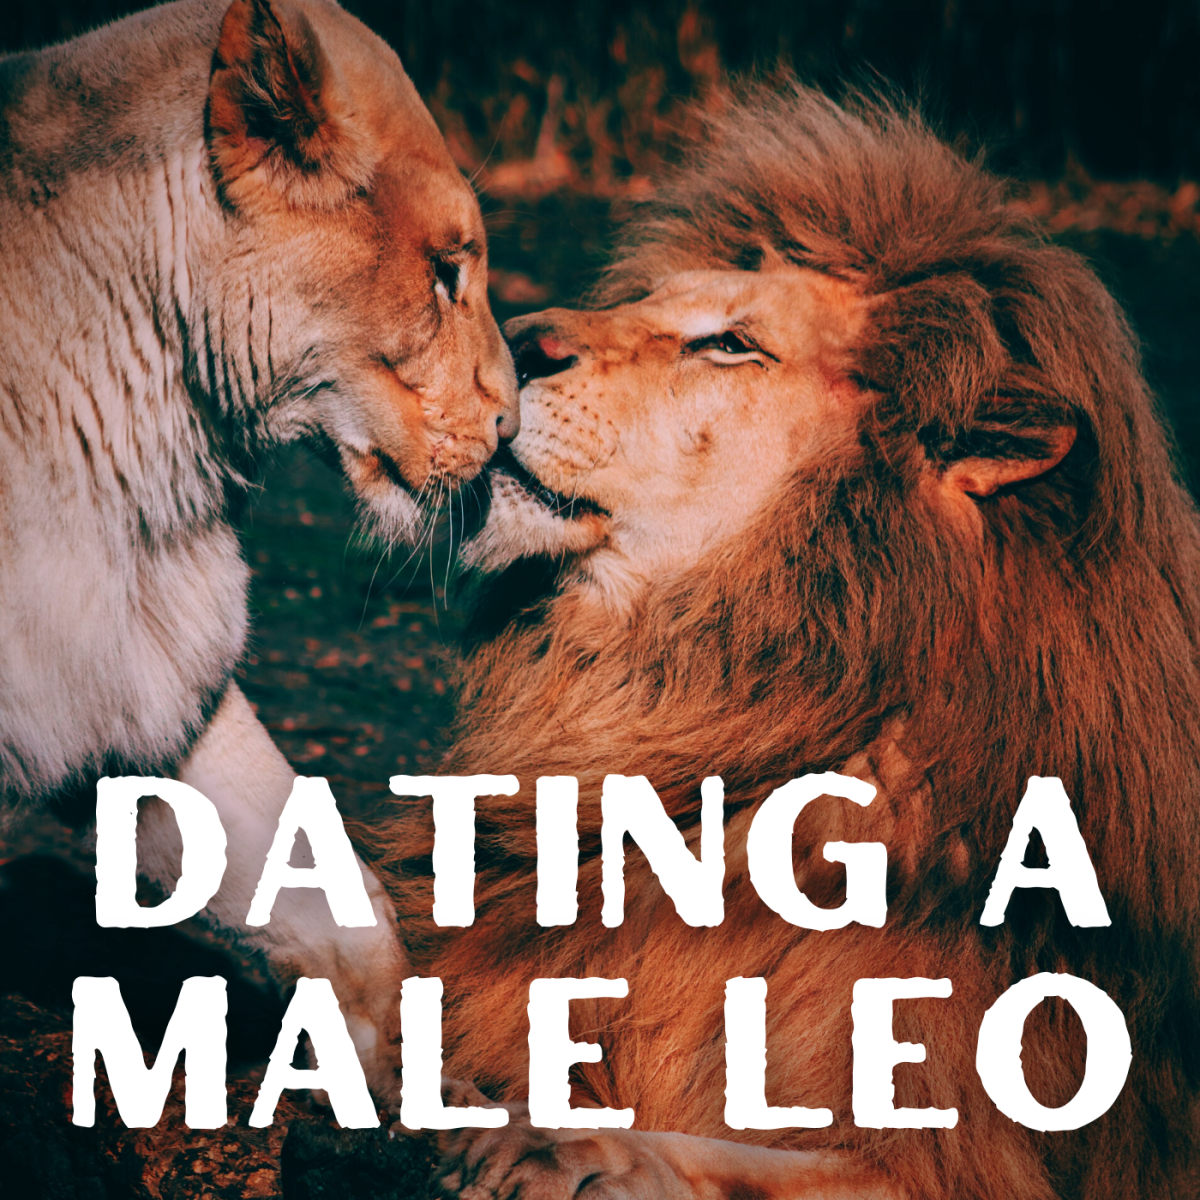 What's it like to date the lion? Enjoy this humorous look at Leo men!